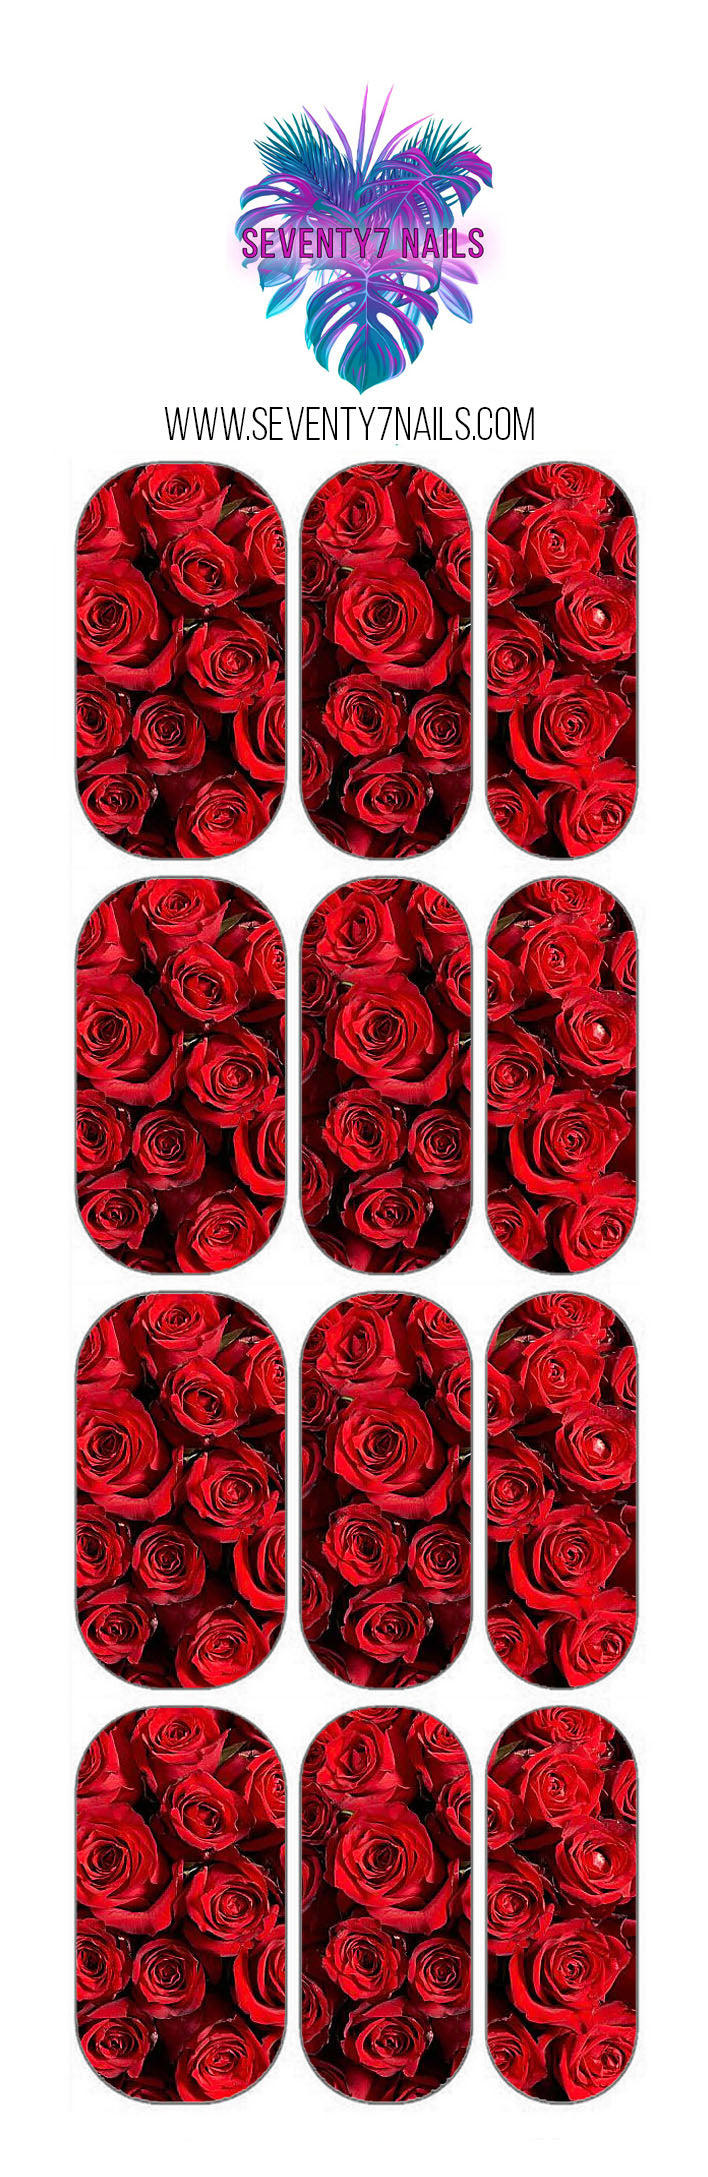 Waterslide Nail Decals - Red Roses